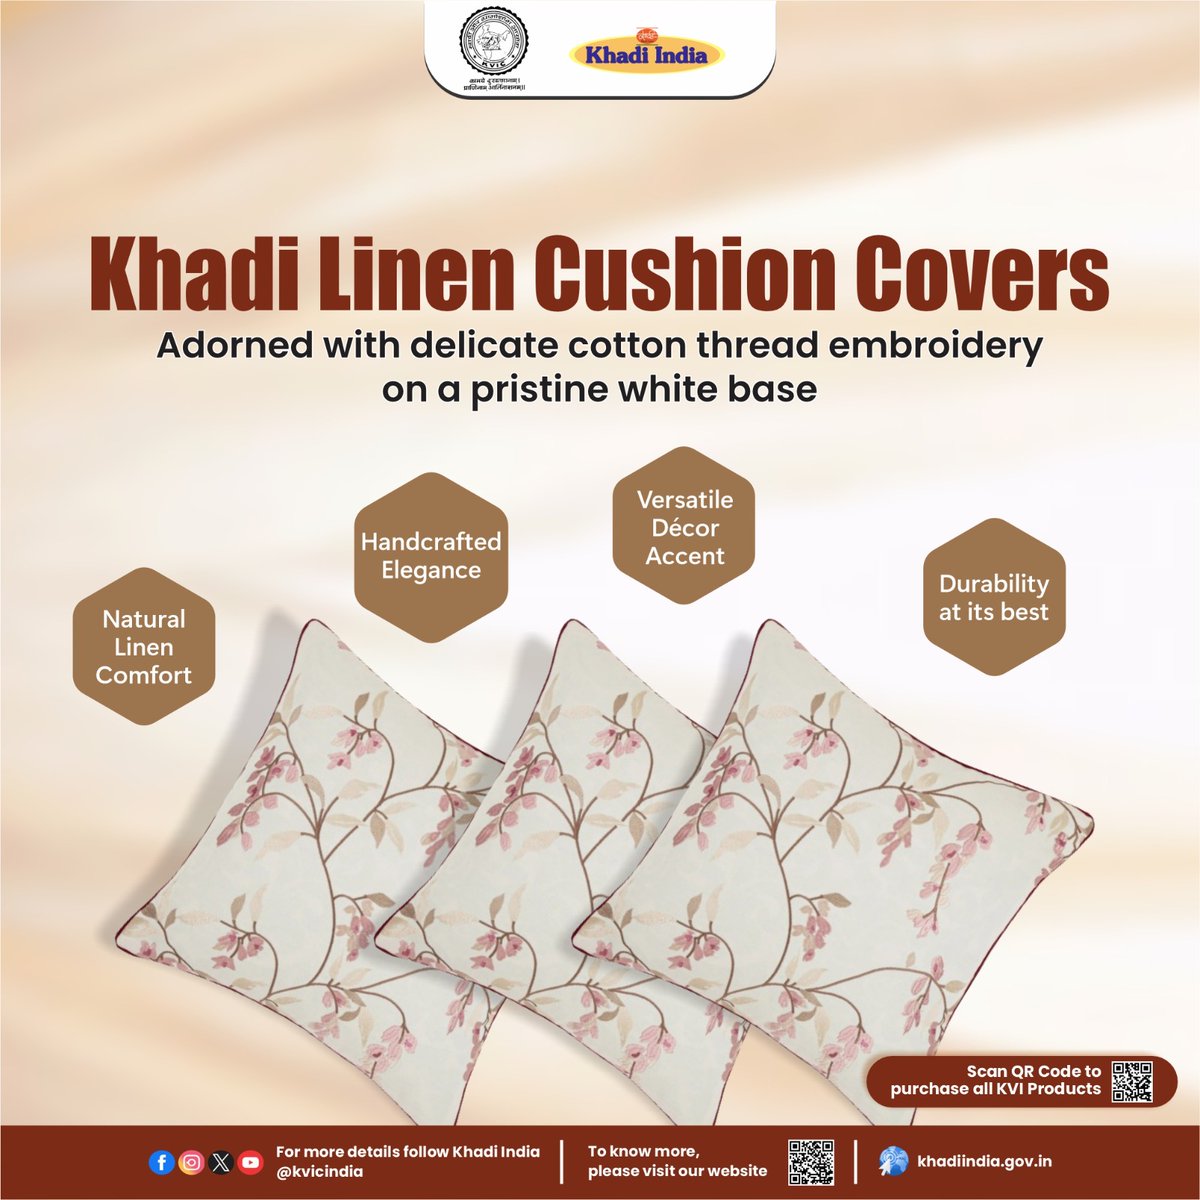 Adding a touch of playfulness to your home decor, our Linen Cushion Covers offer a cozy and comfortable feel, creating an inviting atmosphere in your home. Visit your nearest #Khadi store or purchase all #KVIProducts online at khadiindia.gov.in #KVIC #KhadiIndia